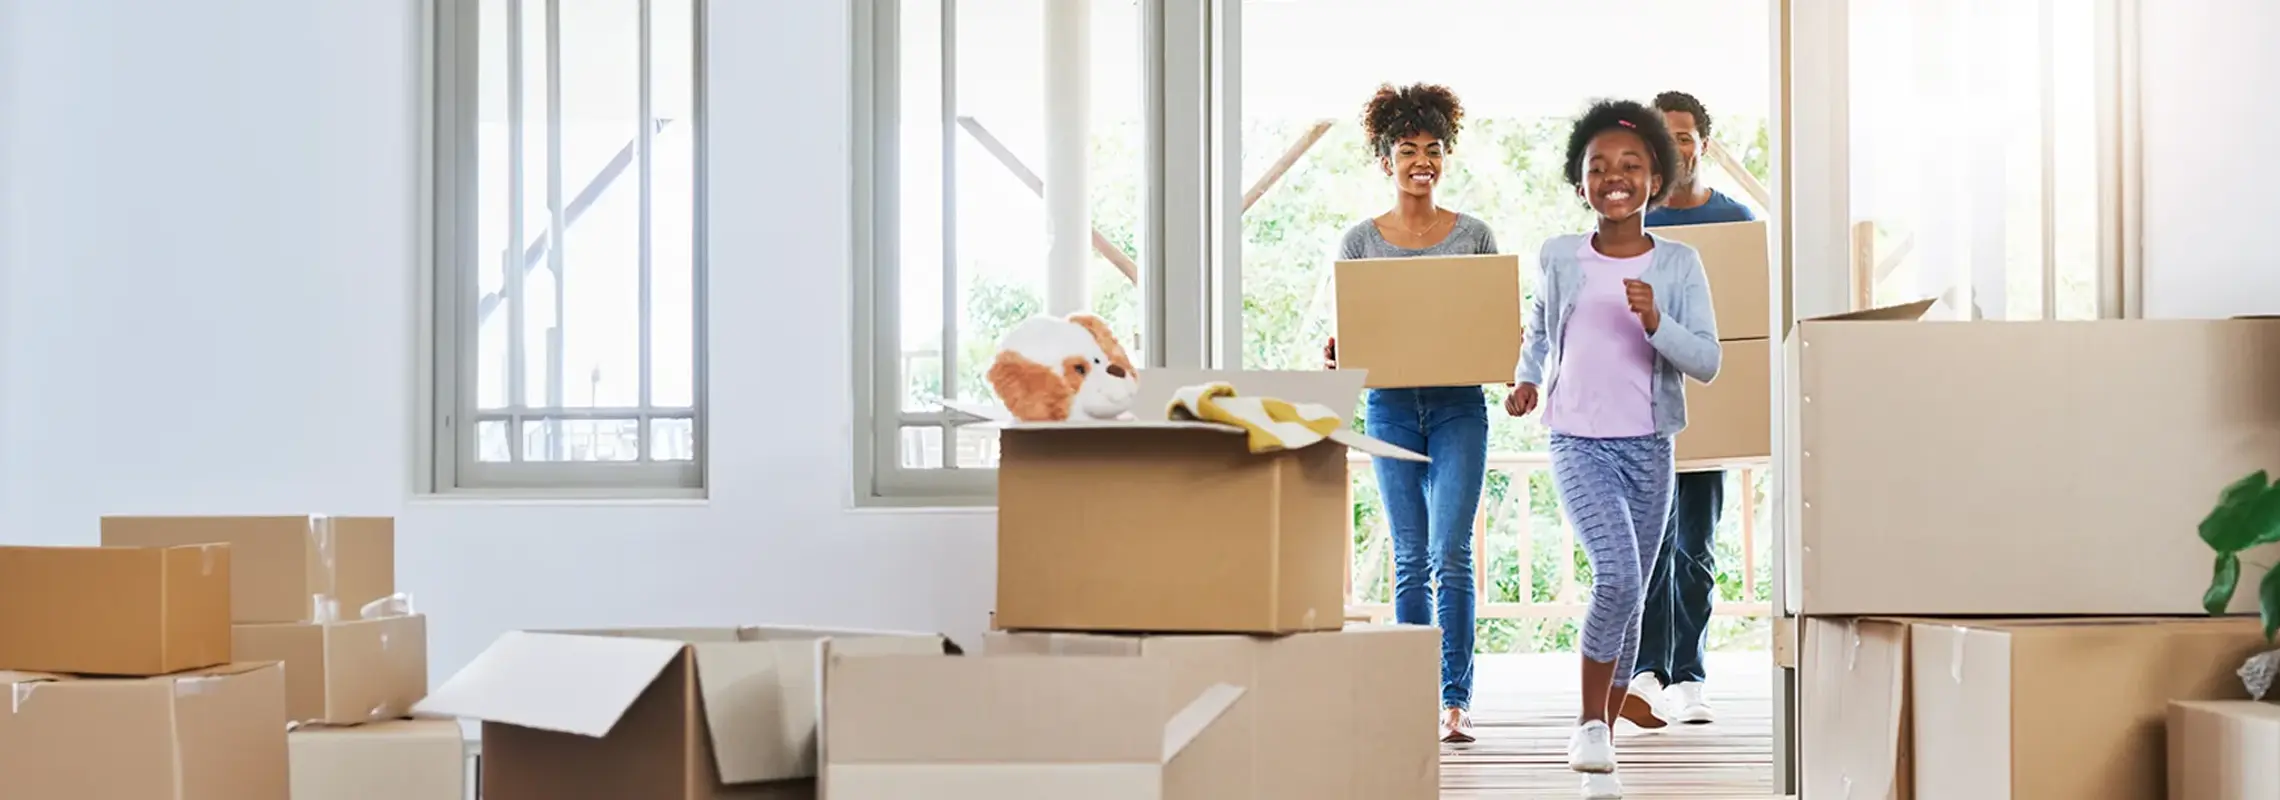 Stock photo of a family moving in